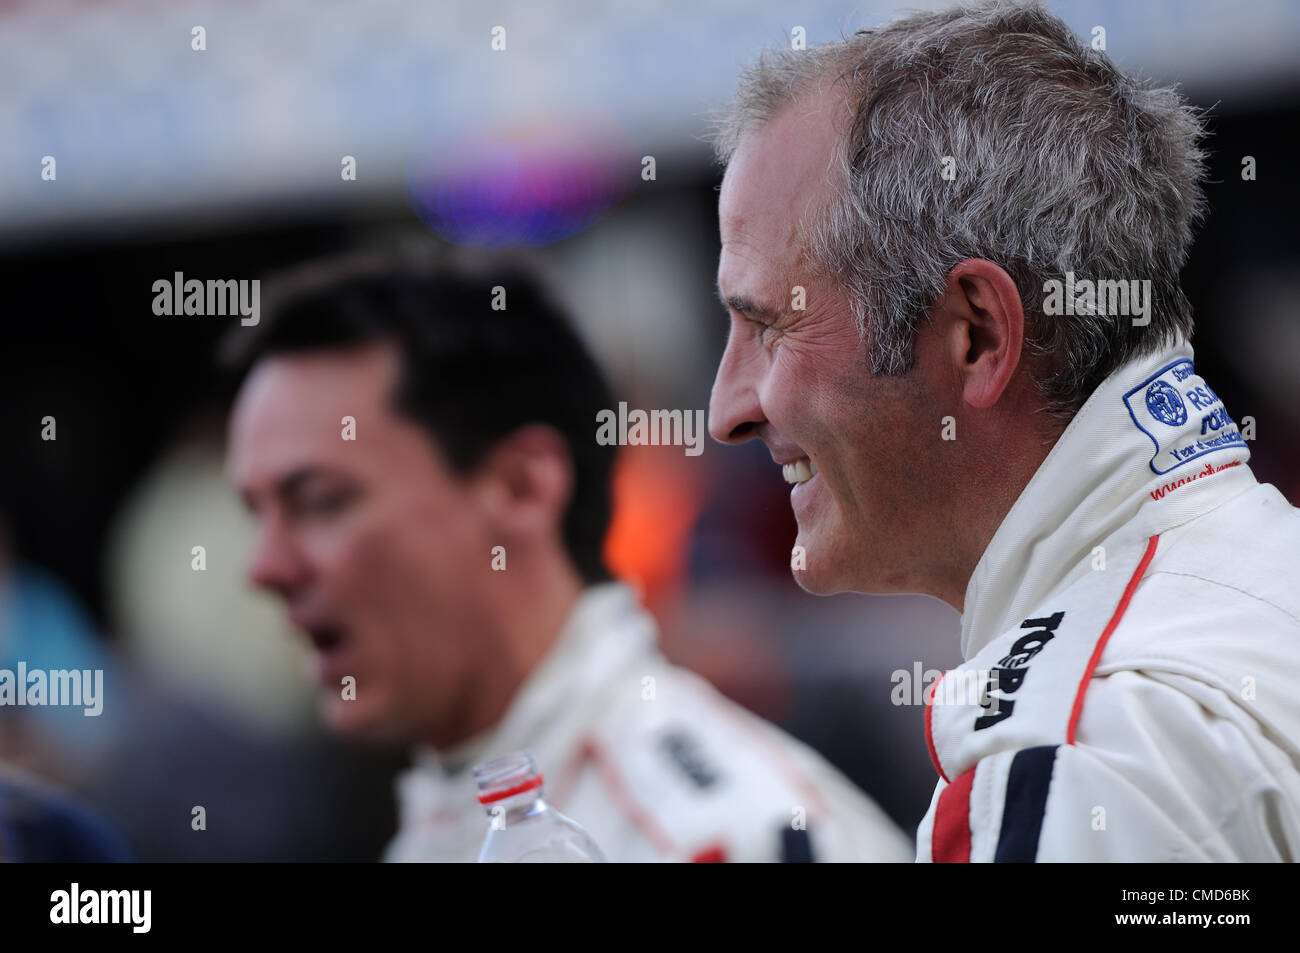 21st July 2012, Silverstone, UK.  Former footballer Steve Ball (foreground) and Radio One DJ Dave Vitty (background) after the Silverstone Classic Celebrity Race Stock Photo